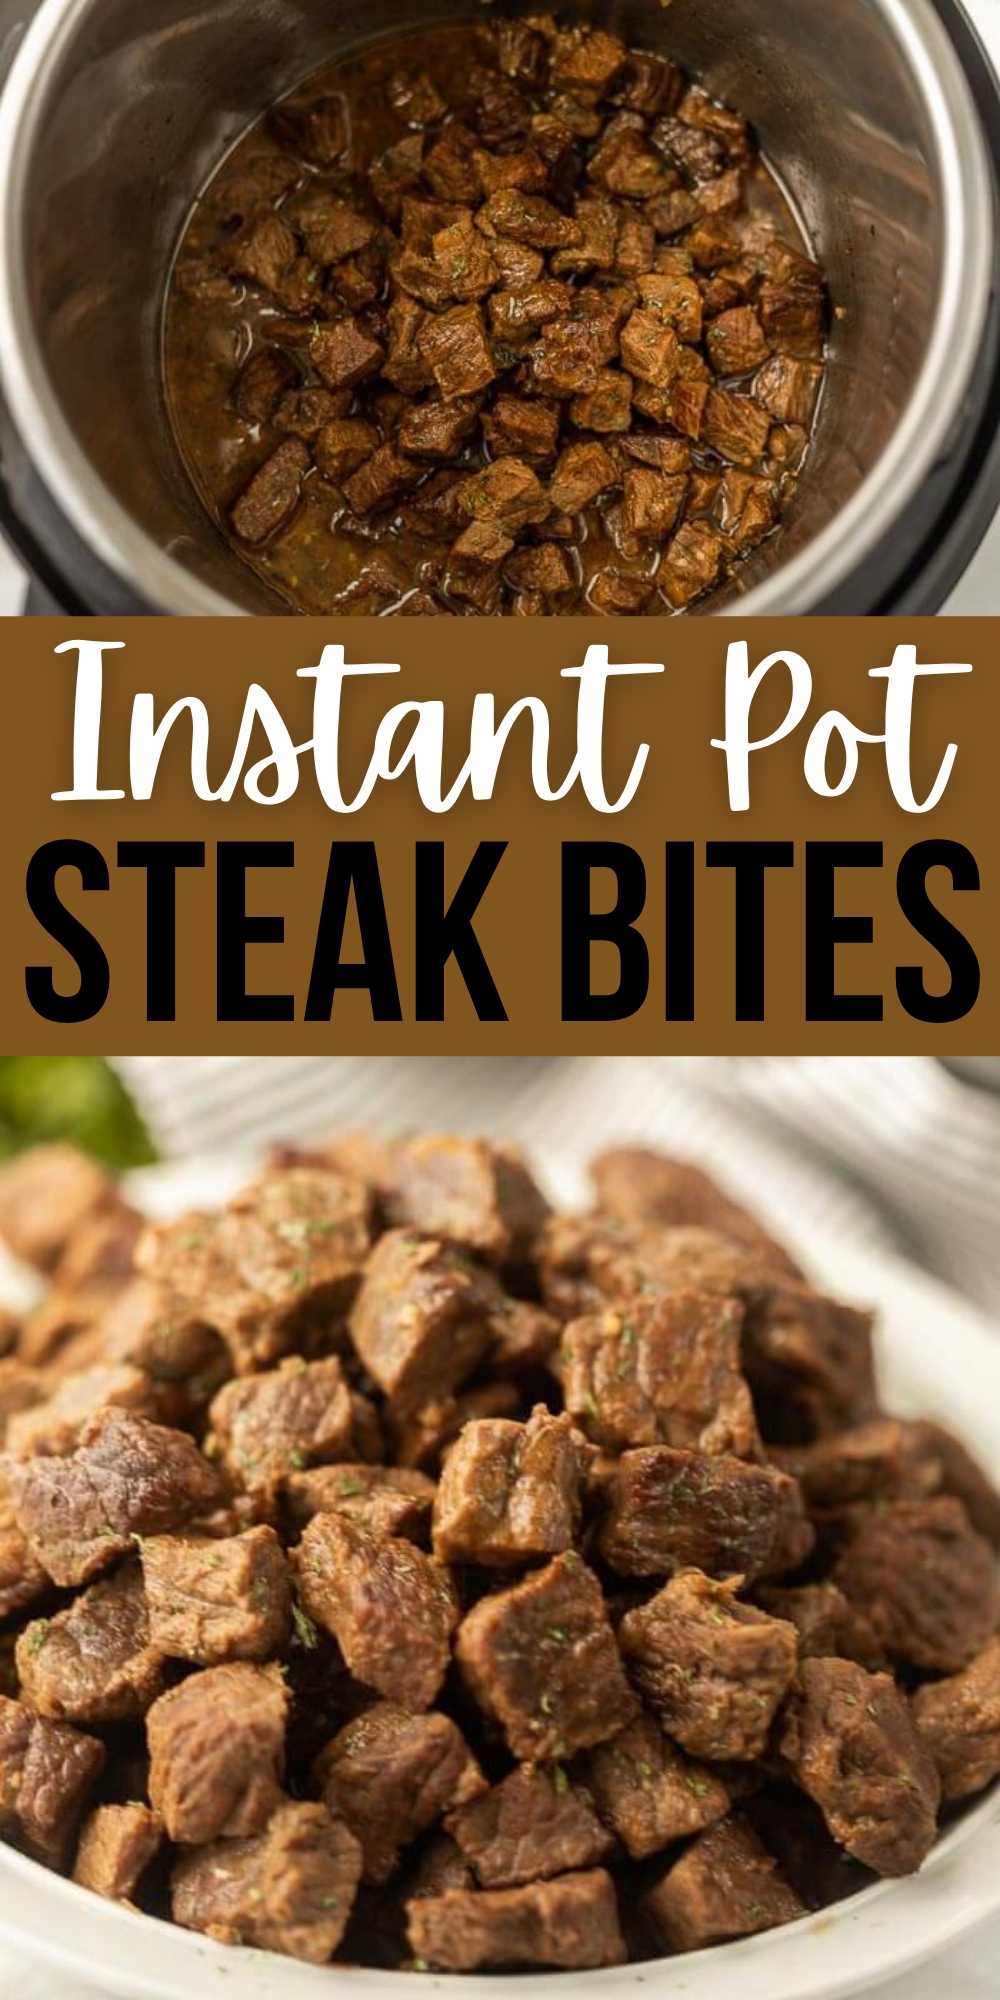 10 Beginner Instant Pot Recipes That ANYONE Can Make! 